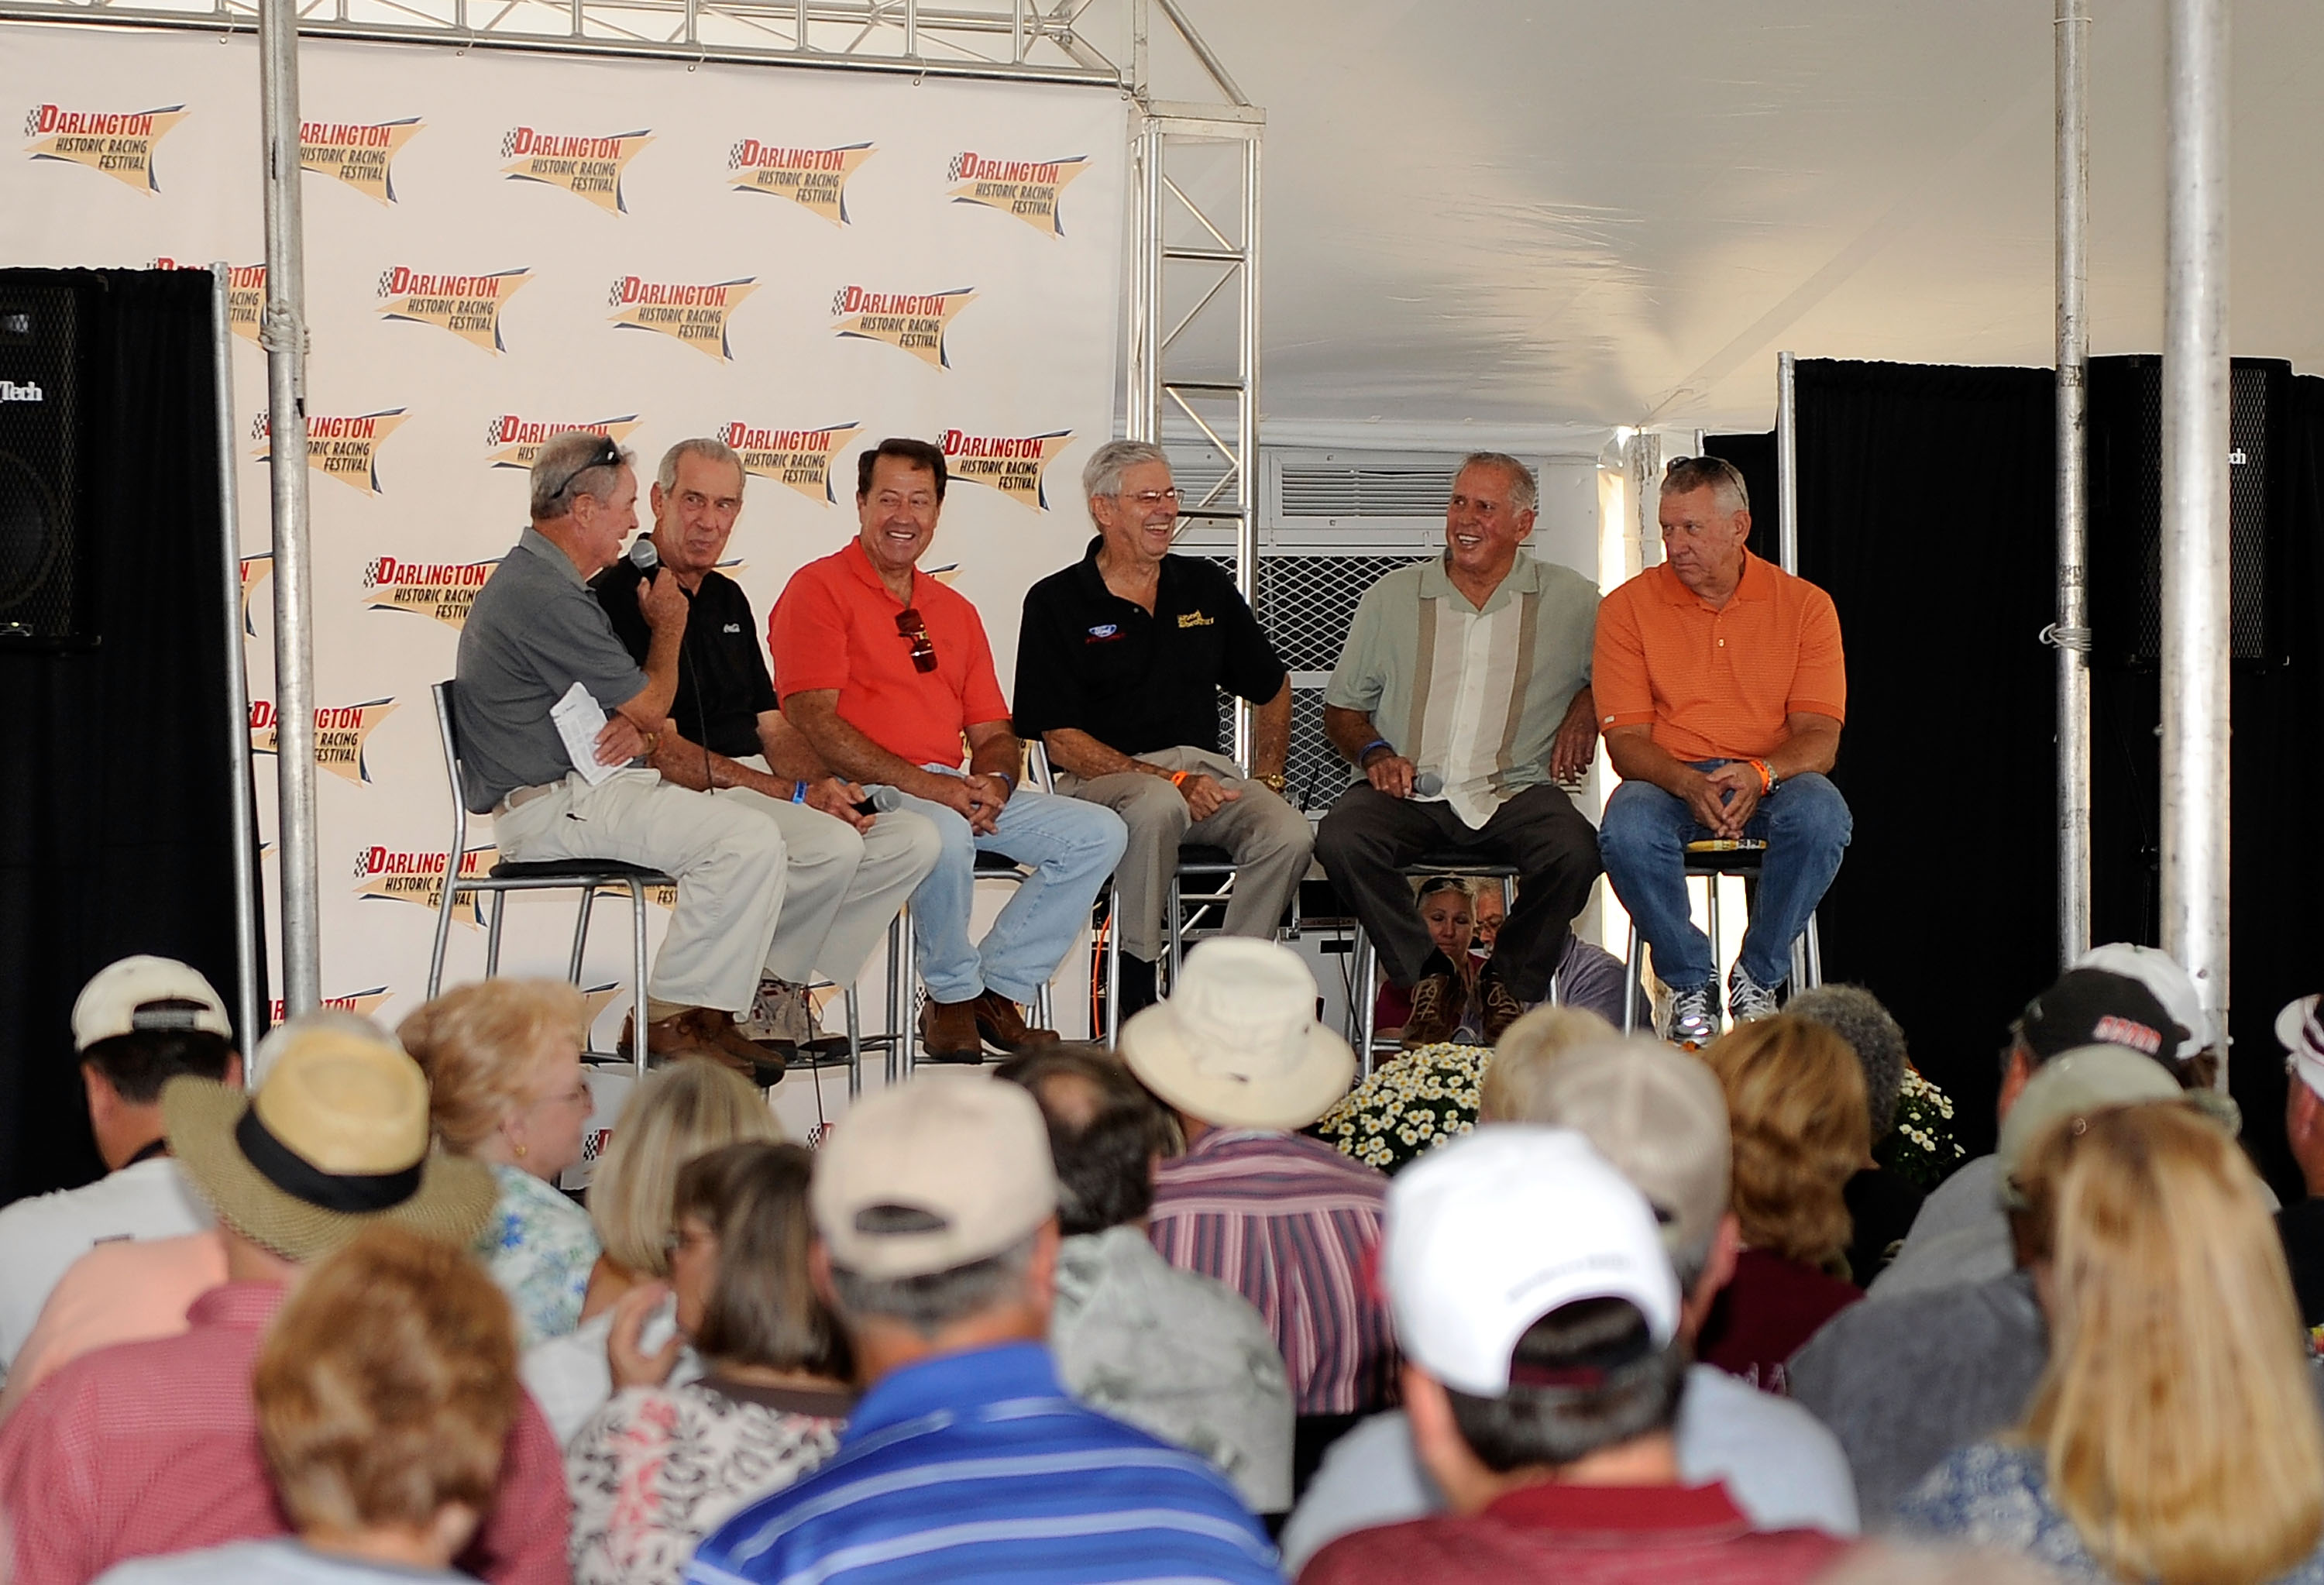 DARLINGTON, SC - SEPTEMBER 25:  Fans attend the Legends Q&A session to see Barney Hall, Ned Jarrett, Harry Gant, Leonard Wood, David Pearson, and Waddell Wilson during the Darlington Historic Racing Festival at Darlington Raceway on September 25, 2010 in